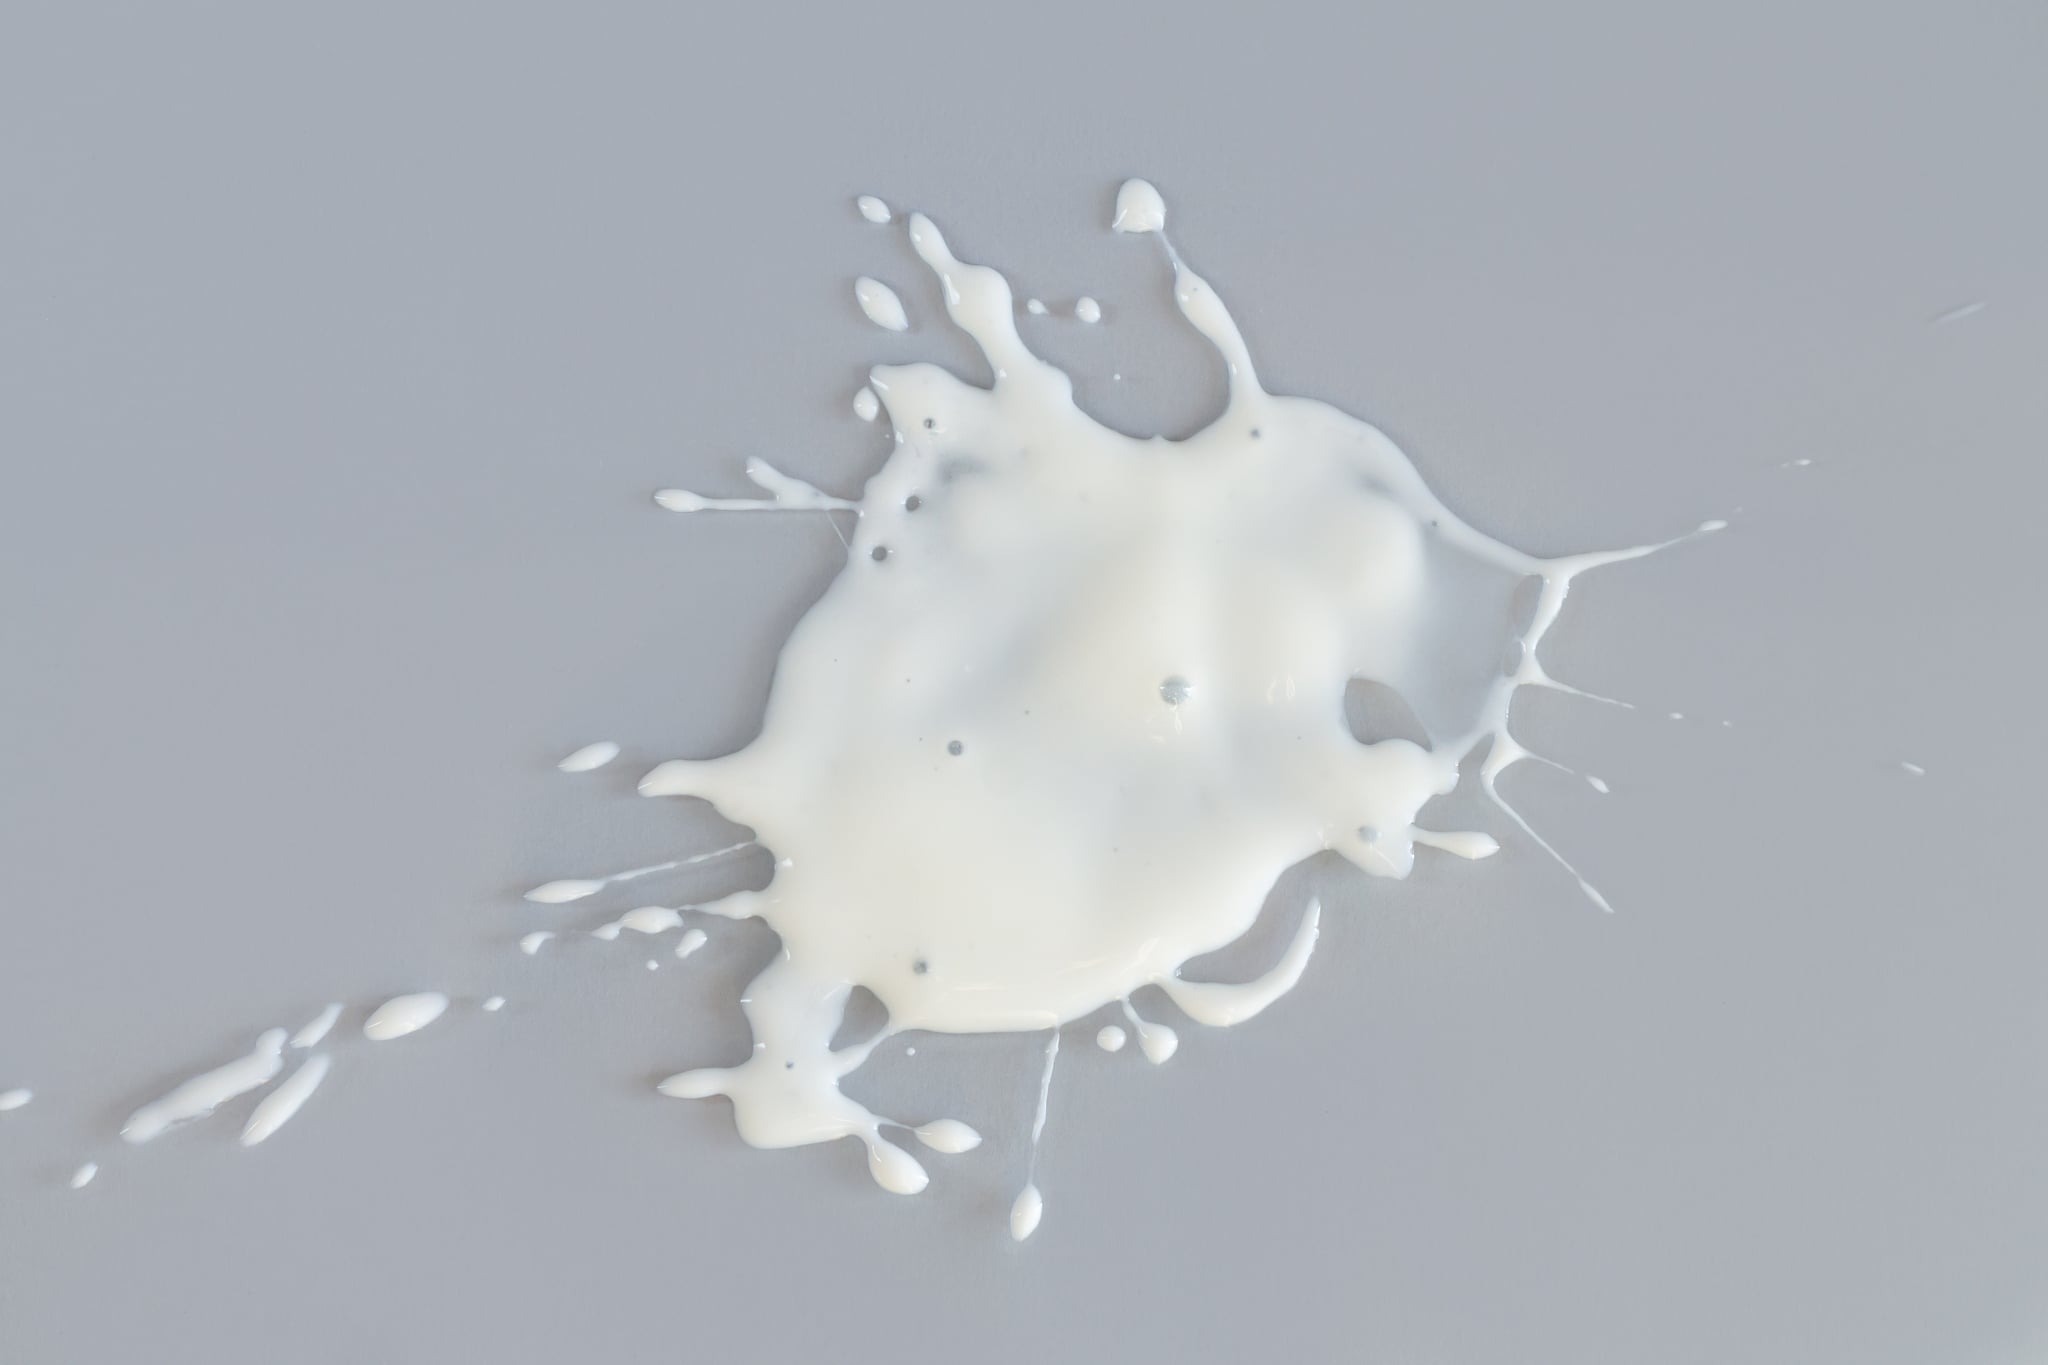 What Is In Semen And How Is It Digested When Swallowed Popsugar Fitness 2419